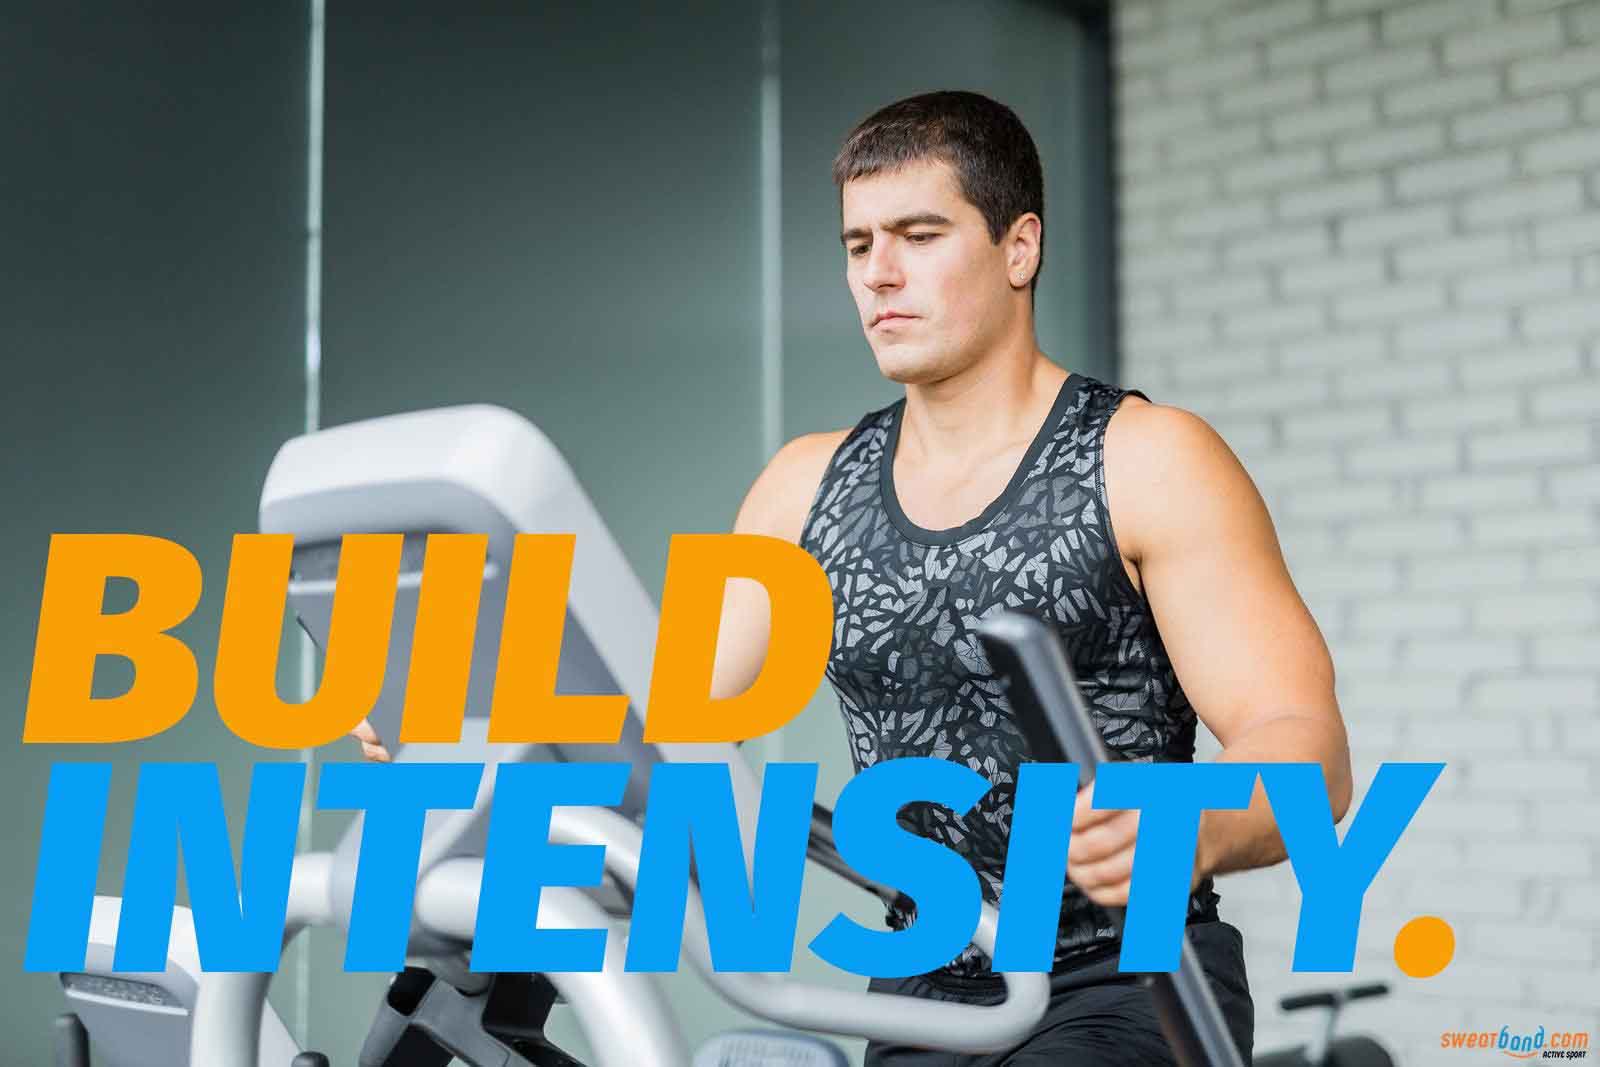 Follow our guide to build up the intensity of your elliptical training sessions